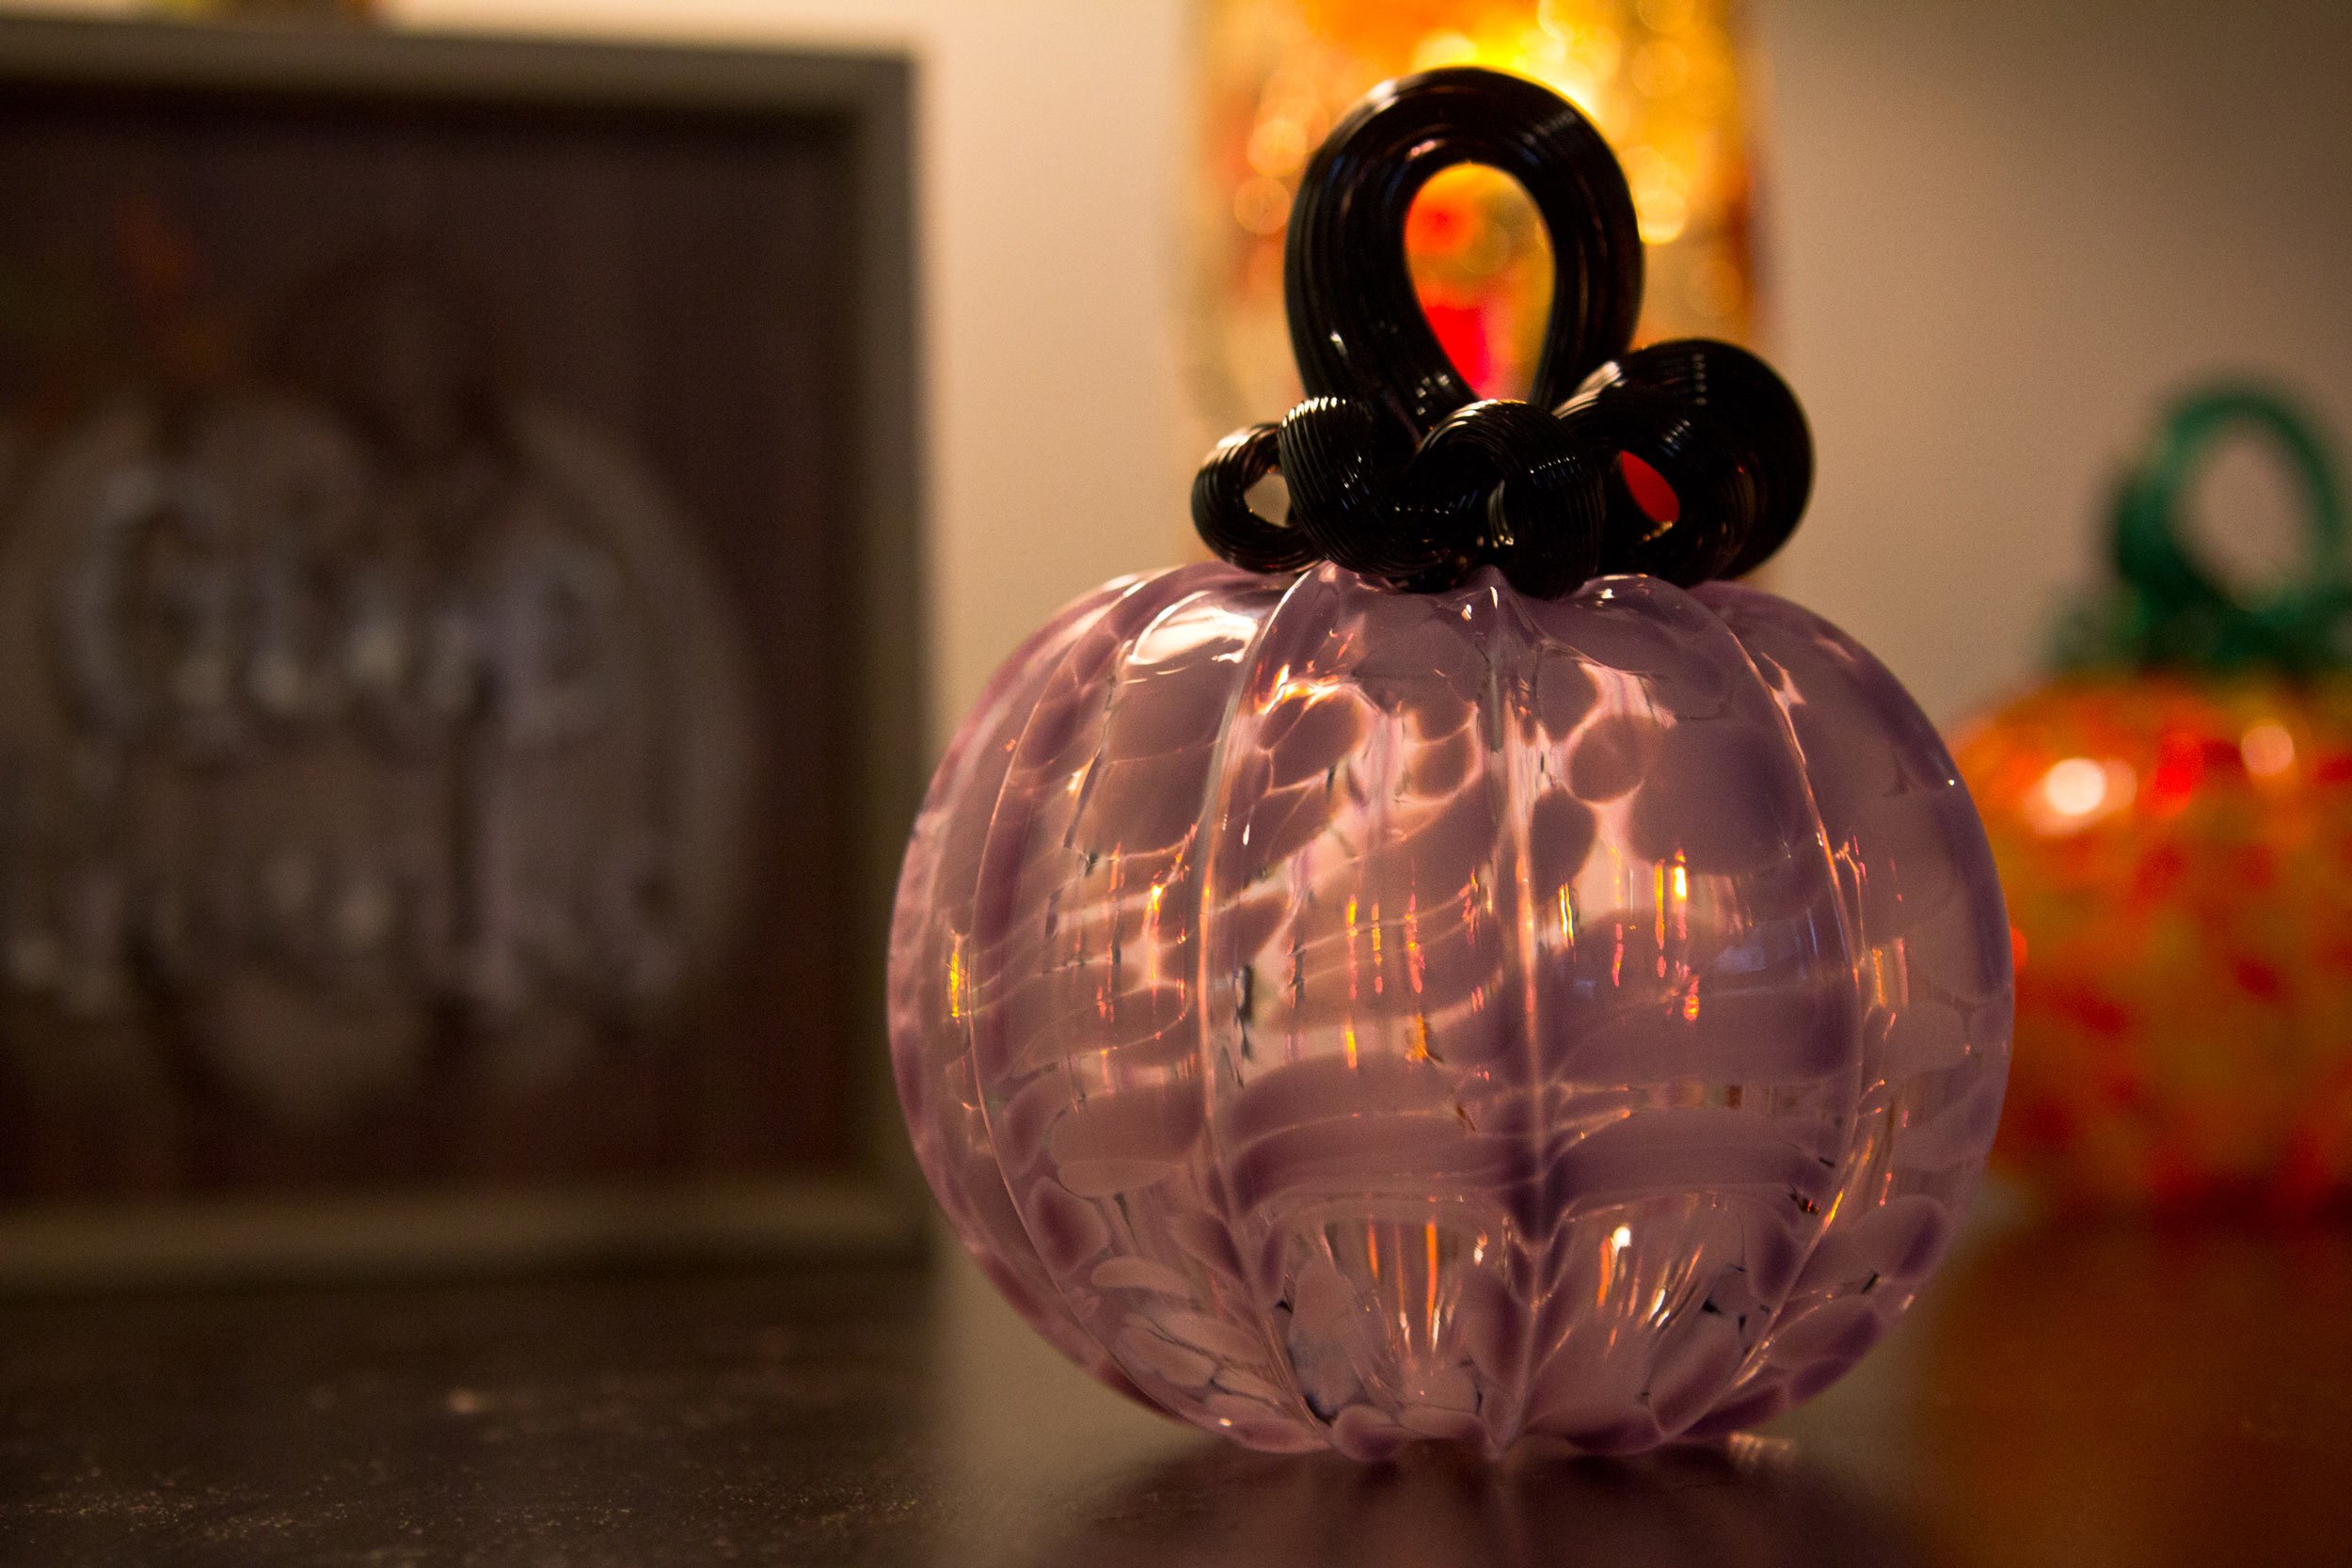 make-your-own-glass-pumpkin-corning-museum-of-glass